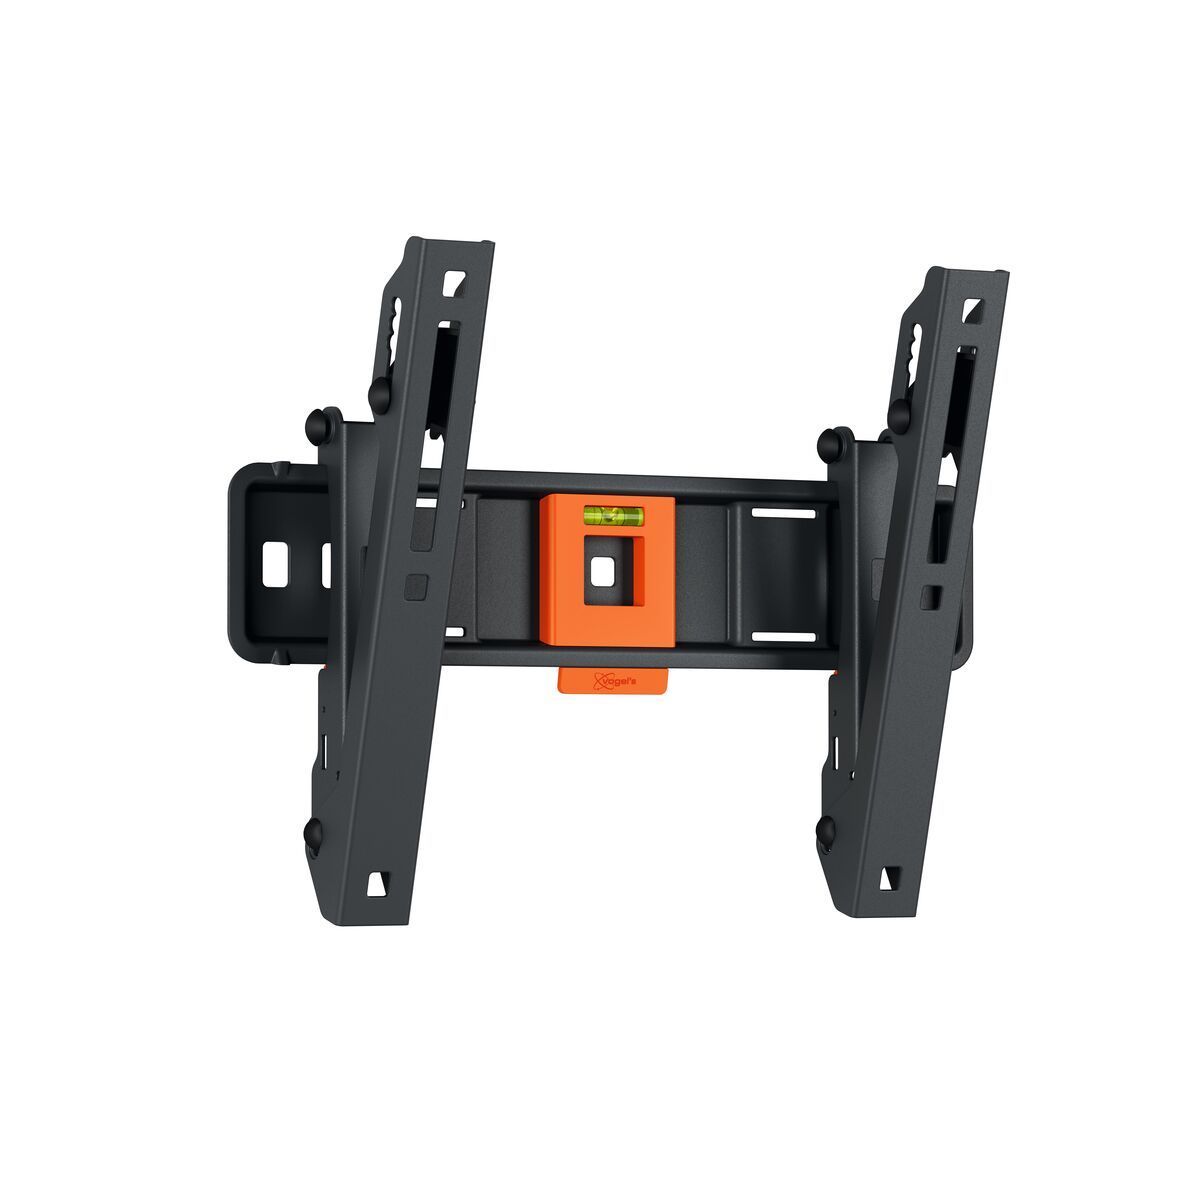 Vogel's TVM 1213 Tilting TV Wall Mount - Suitable for 19 up to 43 inch TVs - Tilt up to 15° - Product